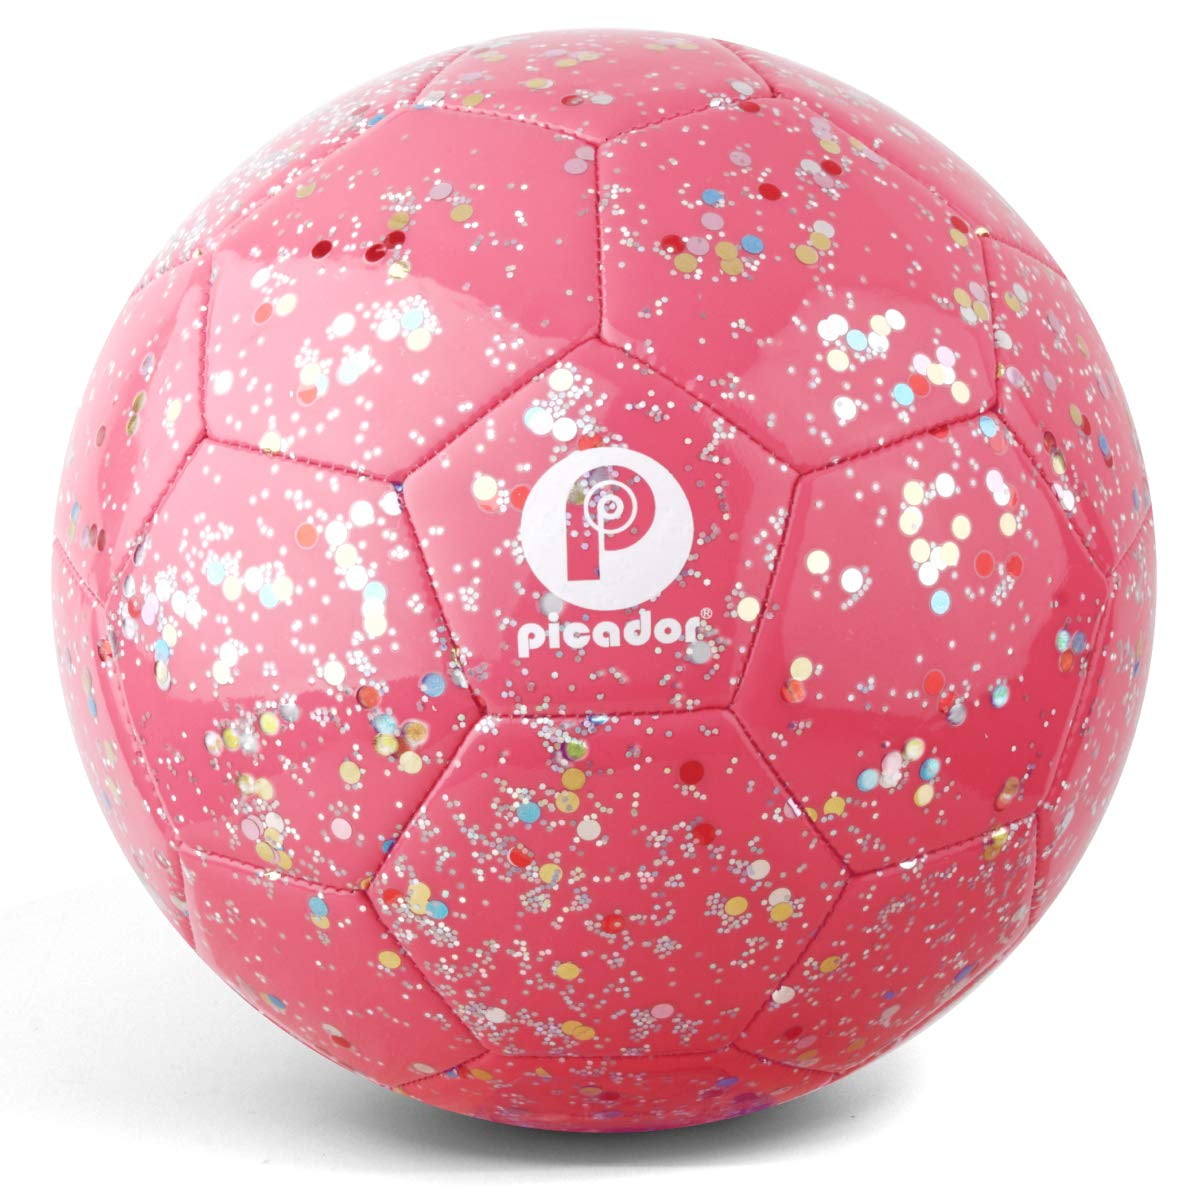 Soccer ball NEW! FRESH PINK SIZE 4 and SIZE 3 available! 